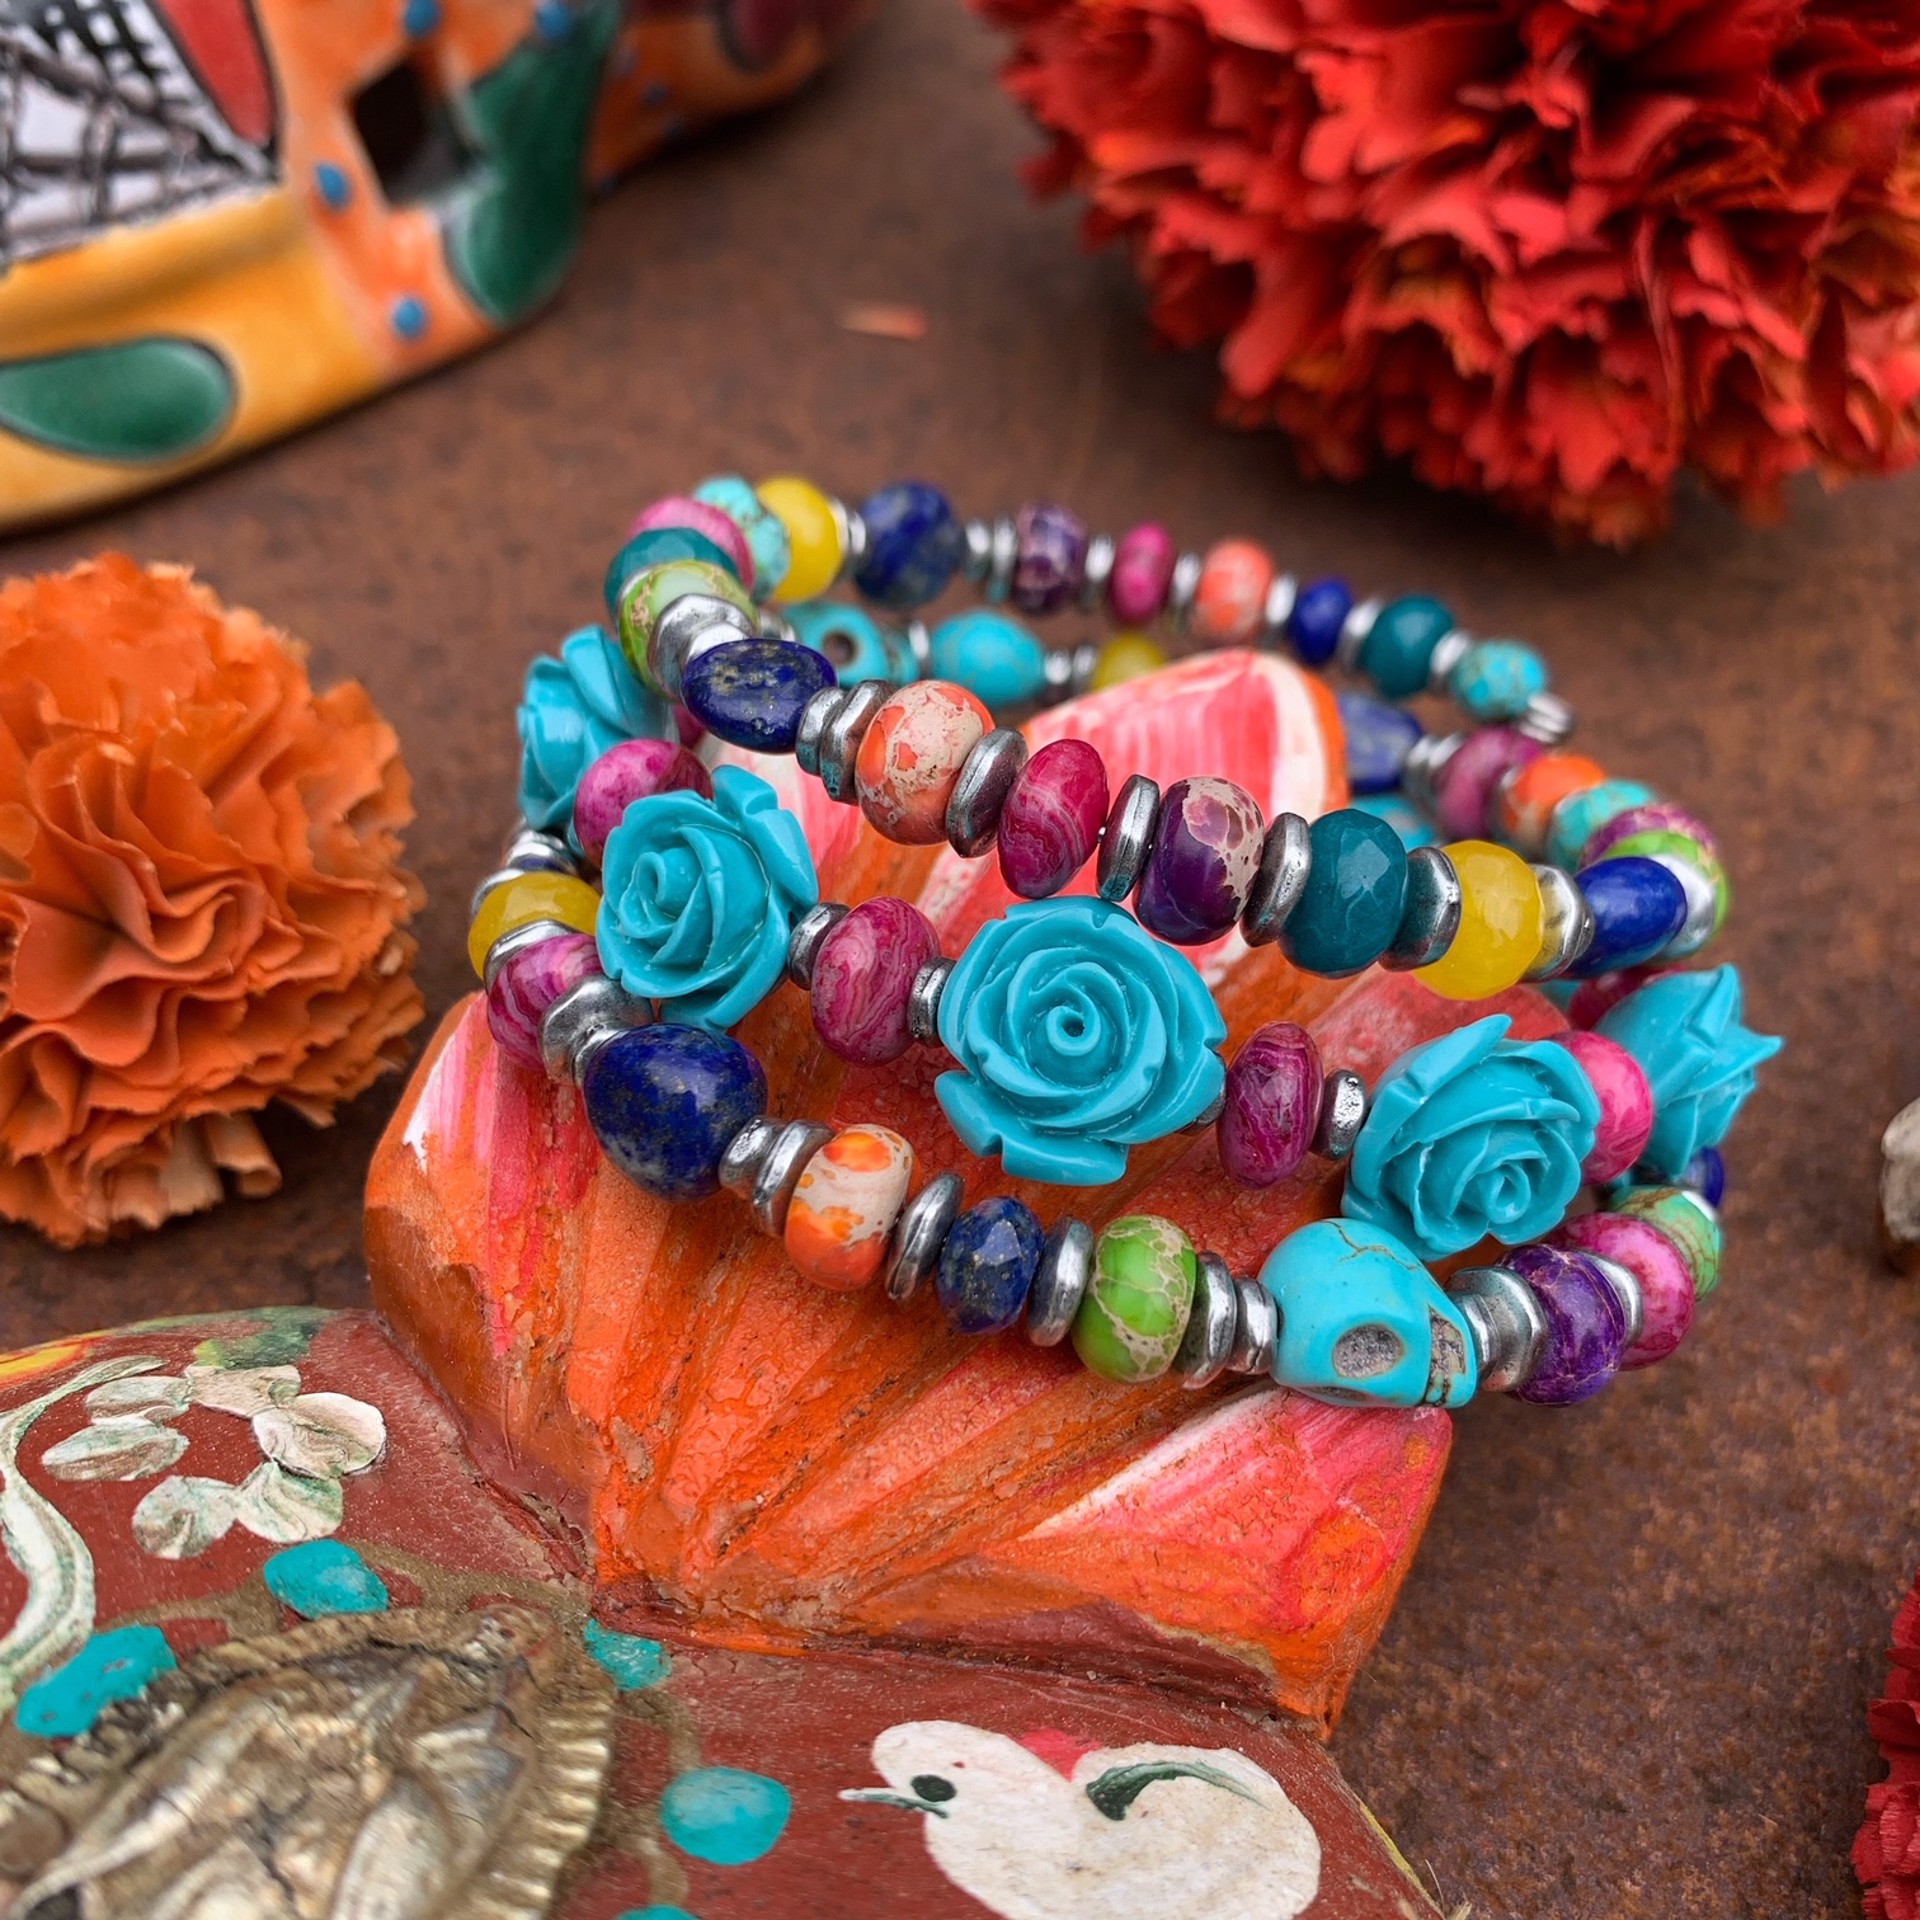 K463 5 Turquoise Roses Bracelet by Kelly Ormsby